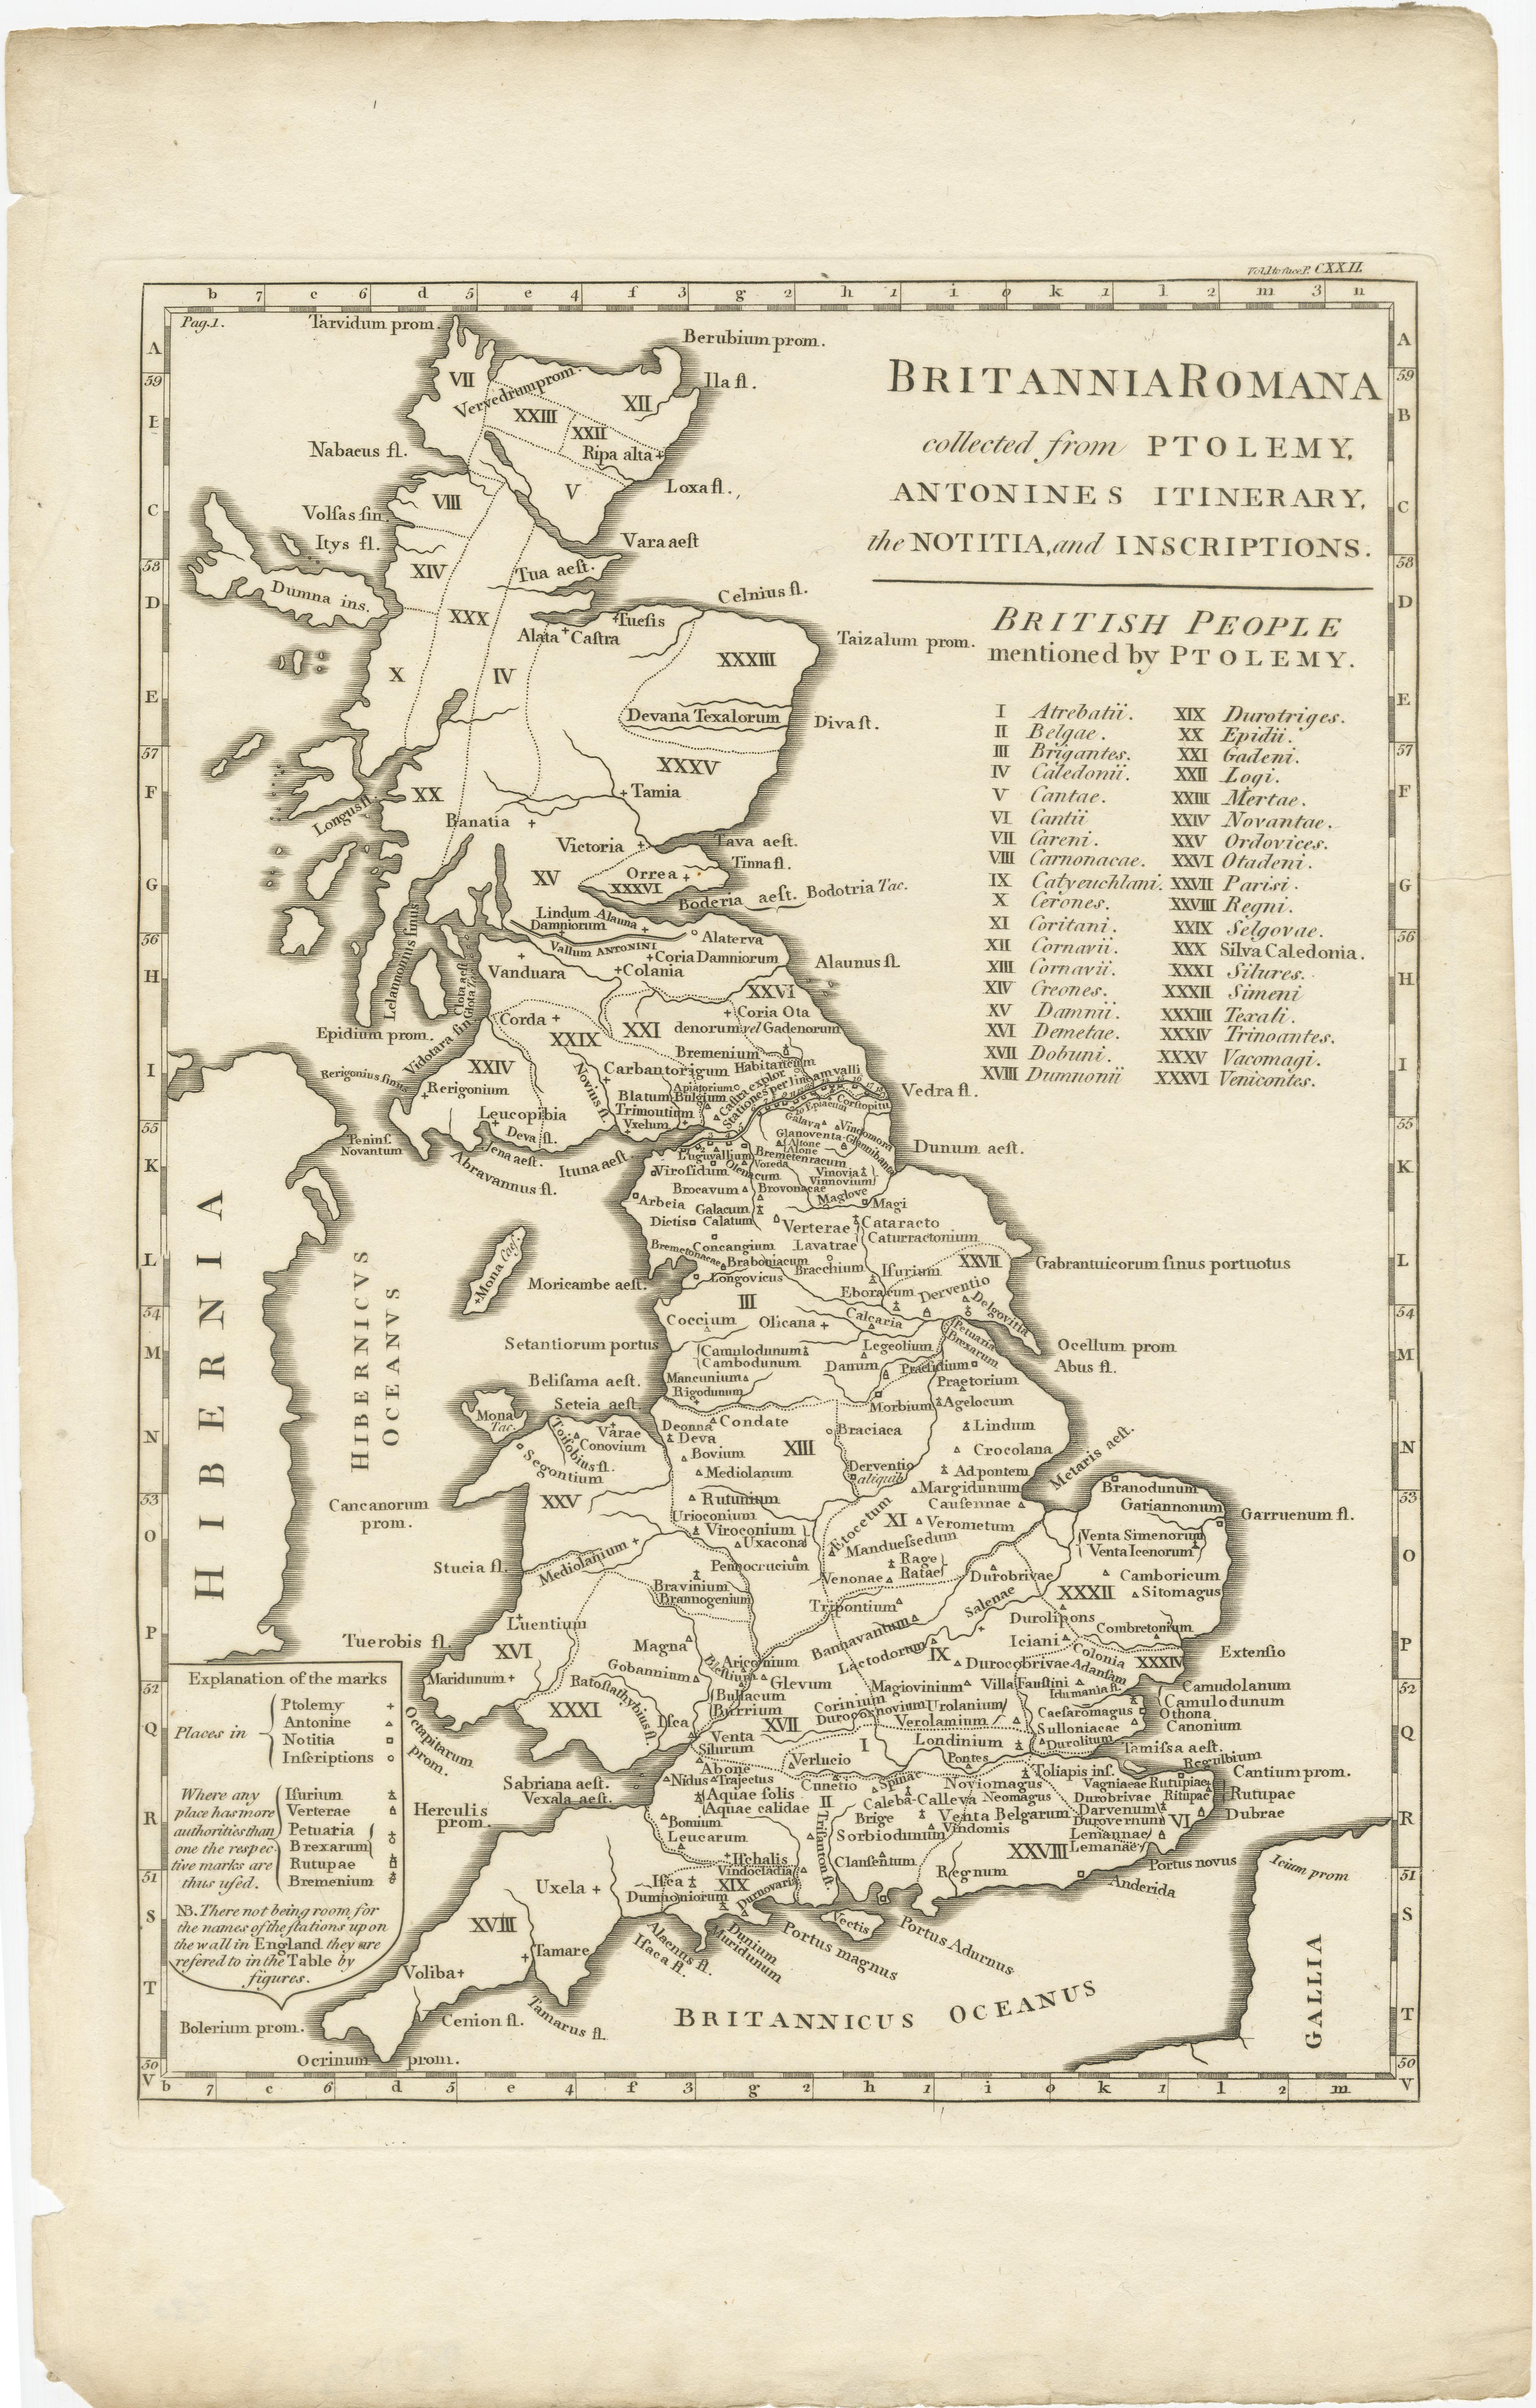 Antique map titled 'Britannia Romana collected from Ptolemy (..)'. Map of Britain in Roman times drawn from several sources, including the works of Ptolemy and The Itinerary of the Emperor Antoninus, a register of the stations and distances along